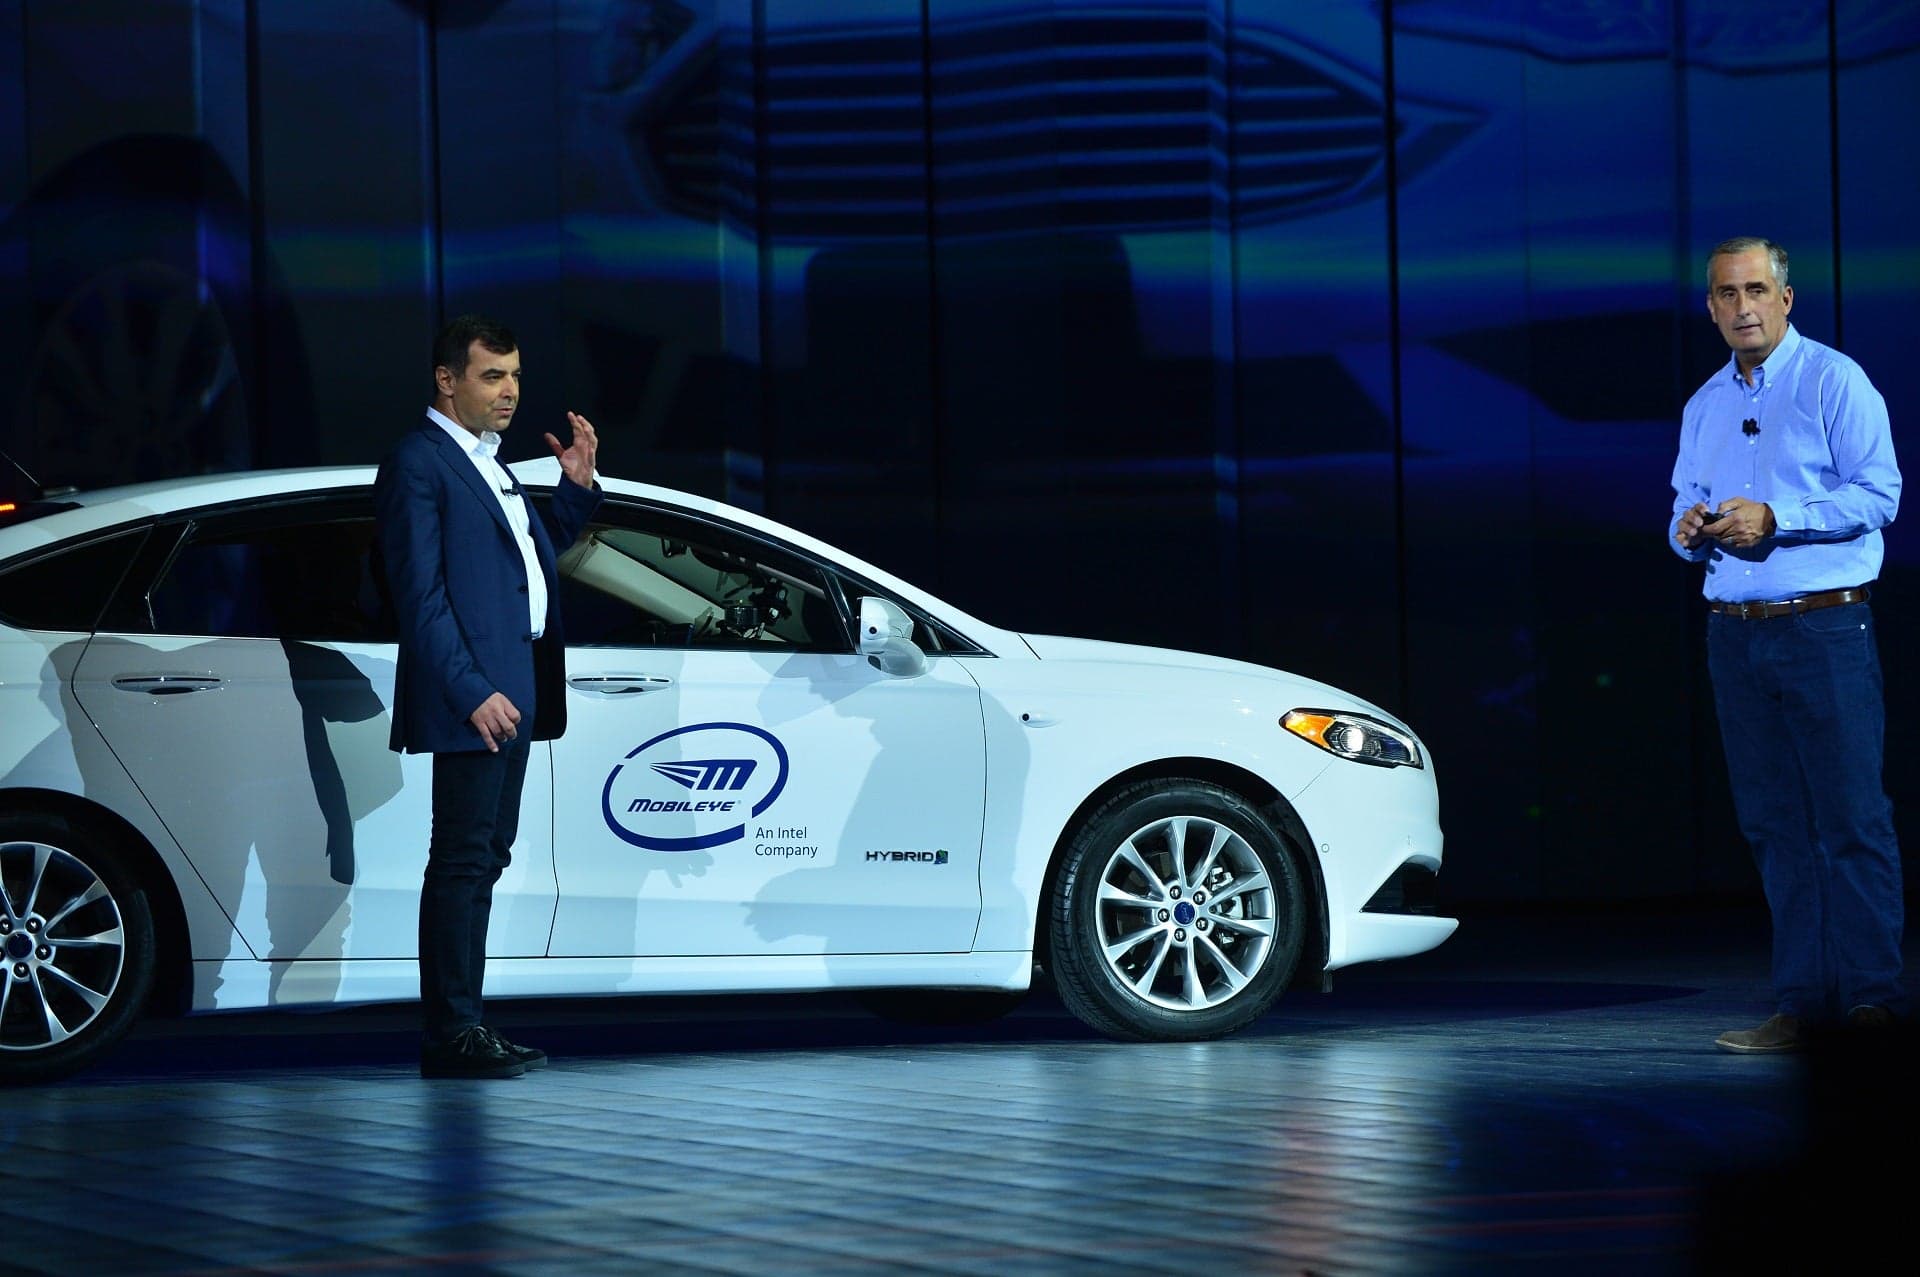 Intel Reveals First of 100 Self-Driving Test Cars and More at CES 2018